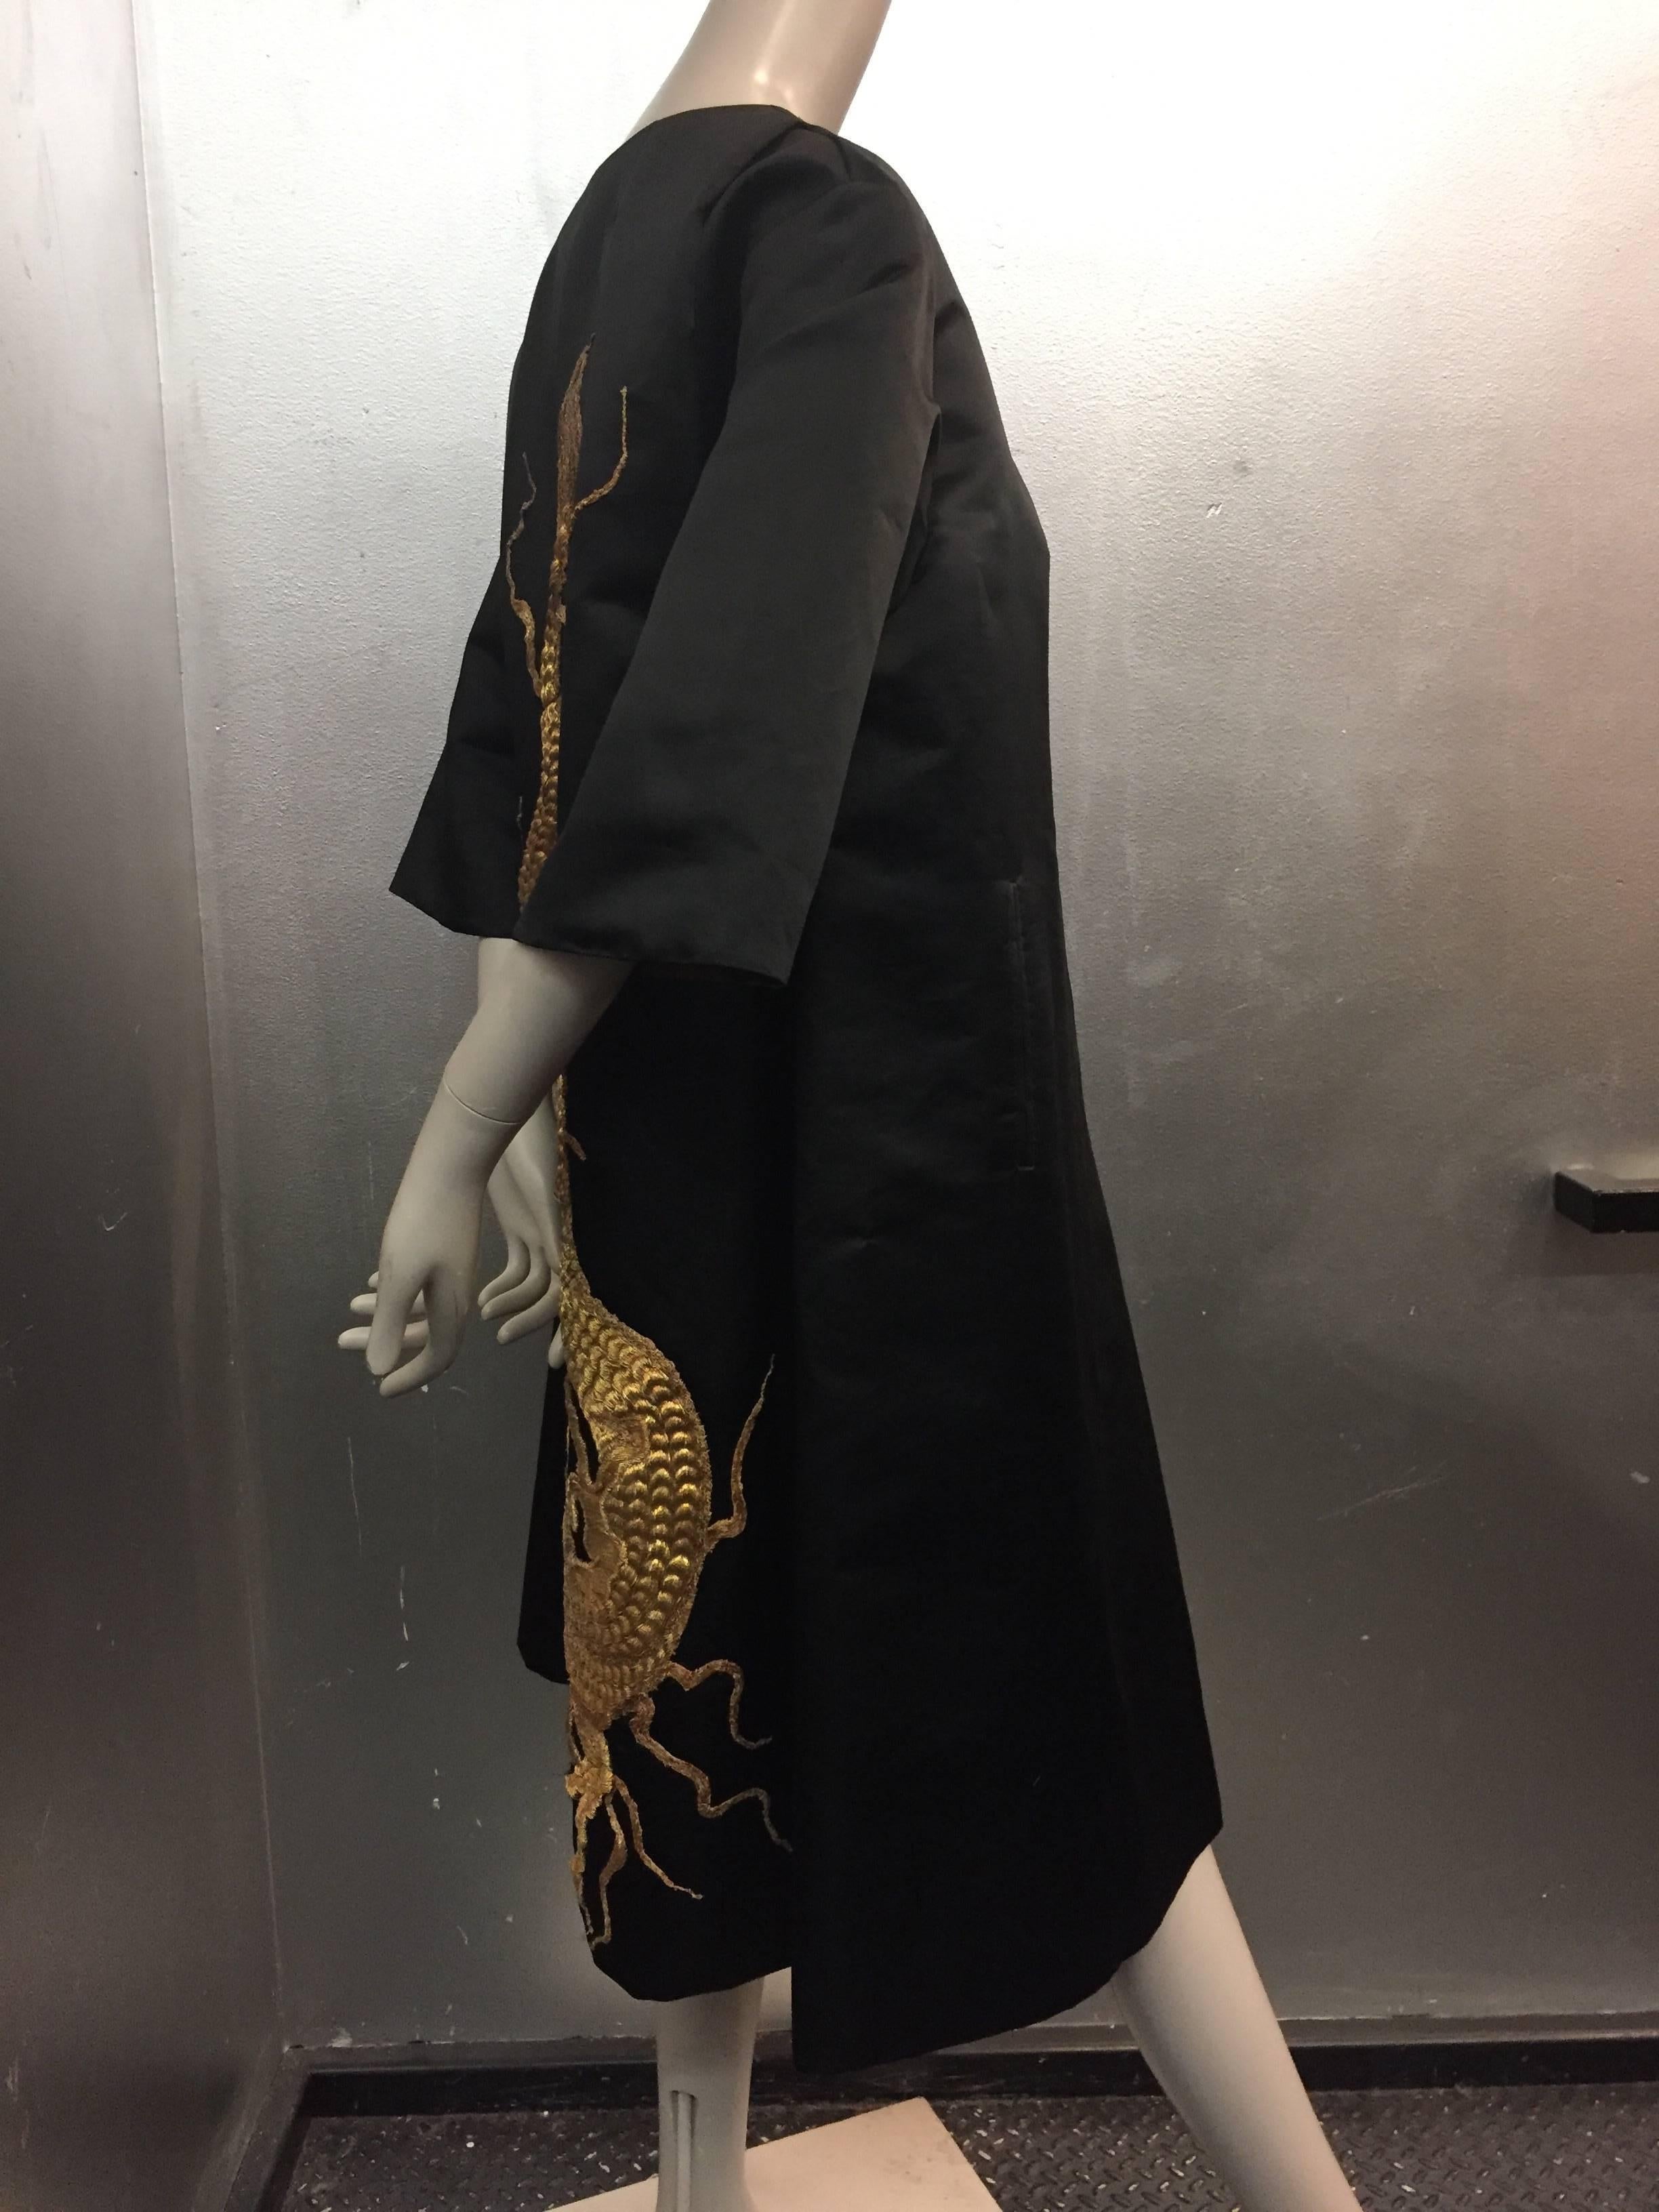 1950s Black silk satin evening coat with stunning antique gold Chinese dragon appliqué.  Lined in tobacco brown silk gazar for structure. Watteau back and 3/4 length sleeves. Side pockets. Dragon appliqué is most likely of a 1920s vintage. 